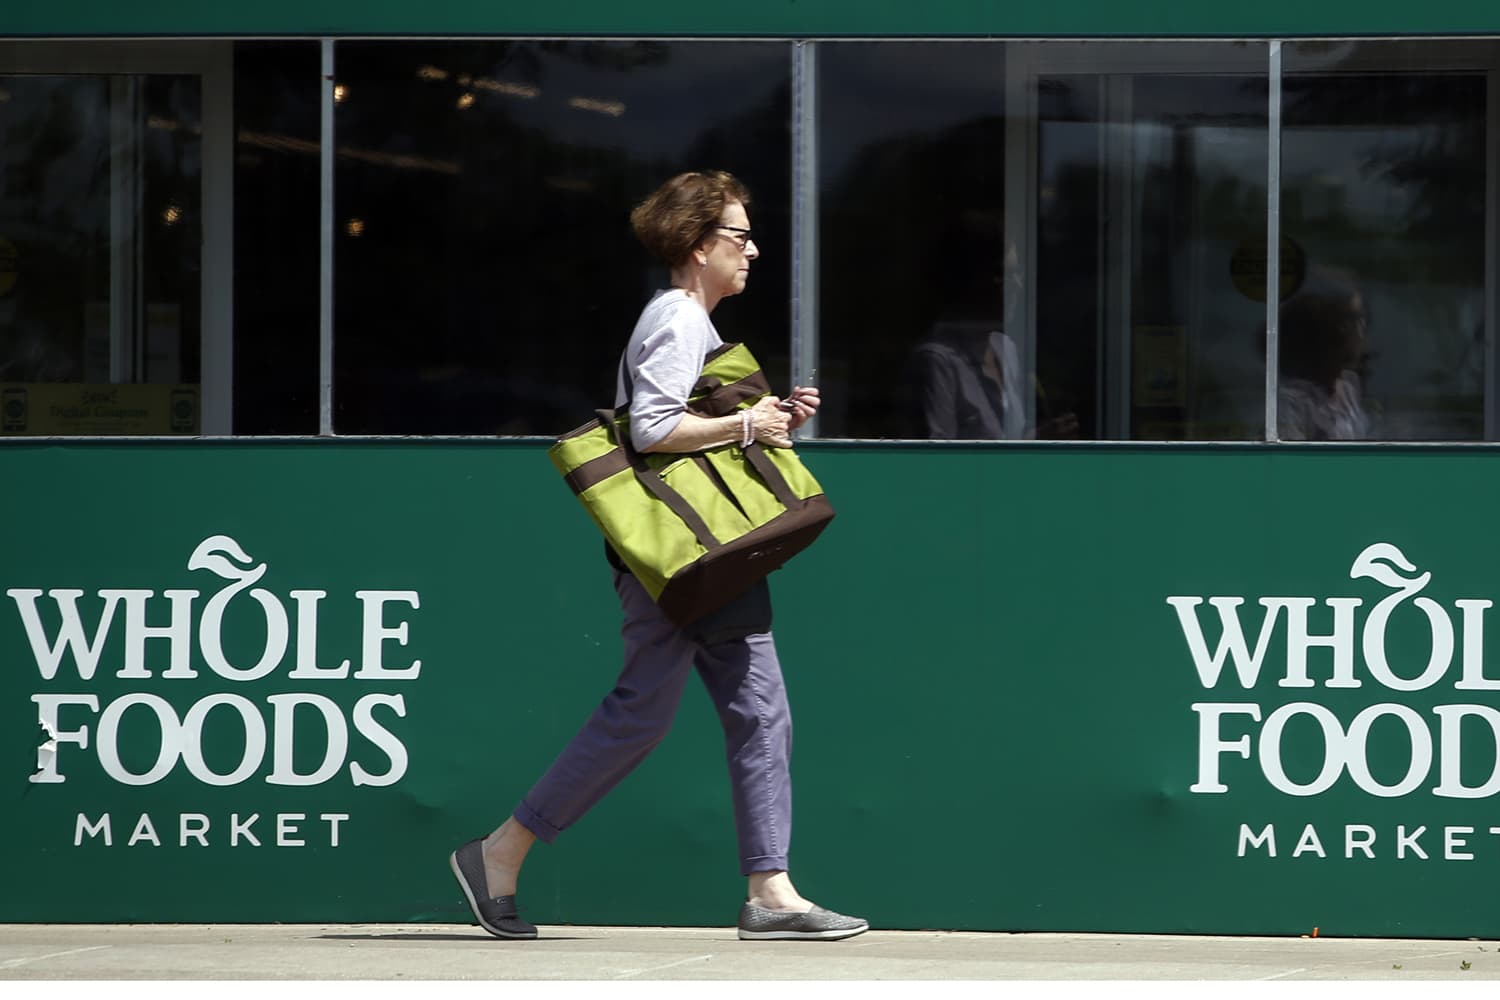 A shopper leaves a Whole Foods Market in Northbrook, Ill., Saturday, June 17, 2017. Amazon is buying Whole Foods in a deal valued at about $13.7 billion, a strong move to expand its growing reach into groceries. (Nam Y. Huh/AP)